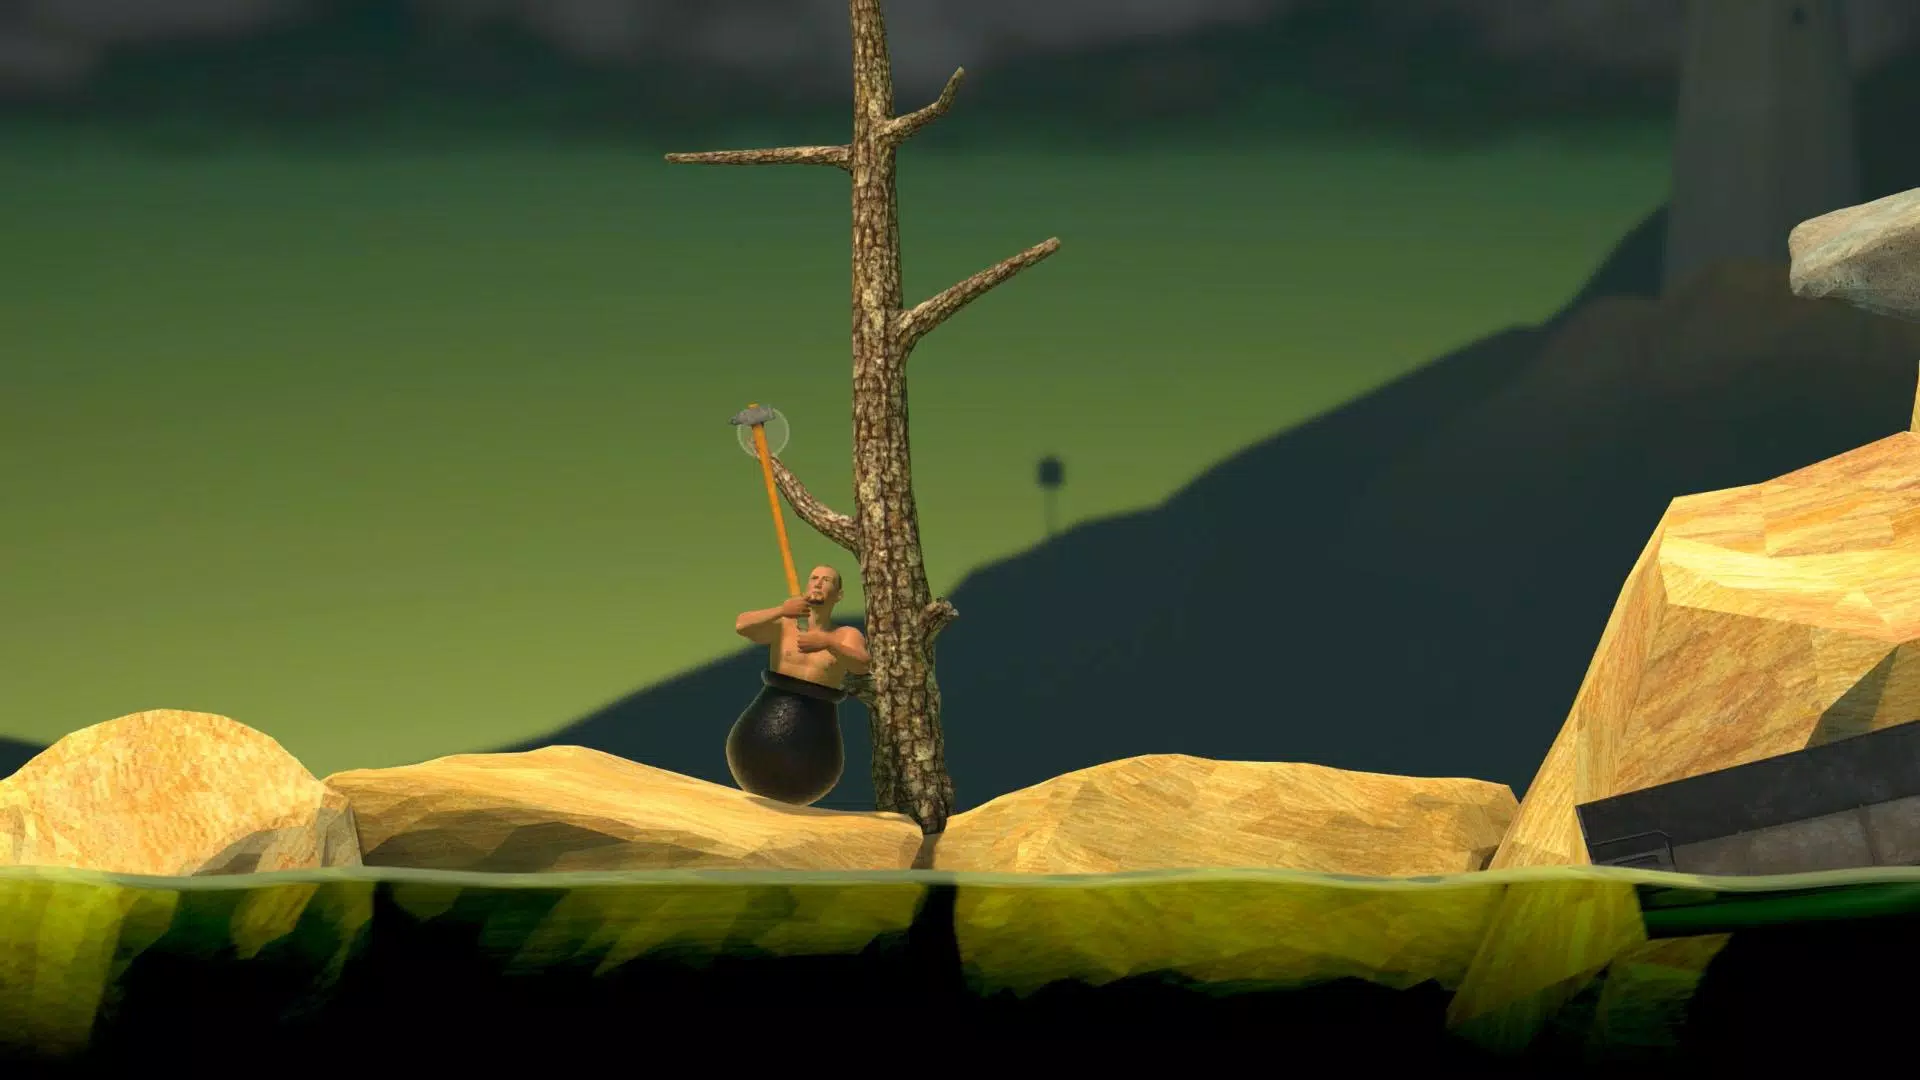 Map Getting Over It with Bennett Foddy APK pour Android Télécharger